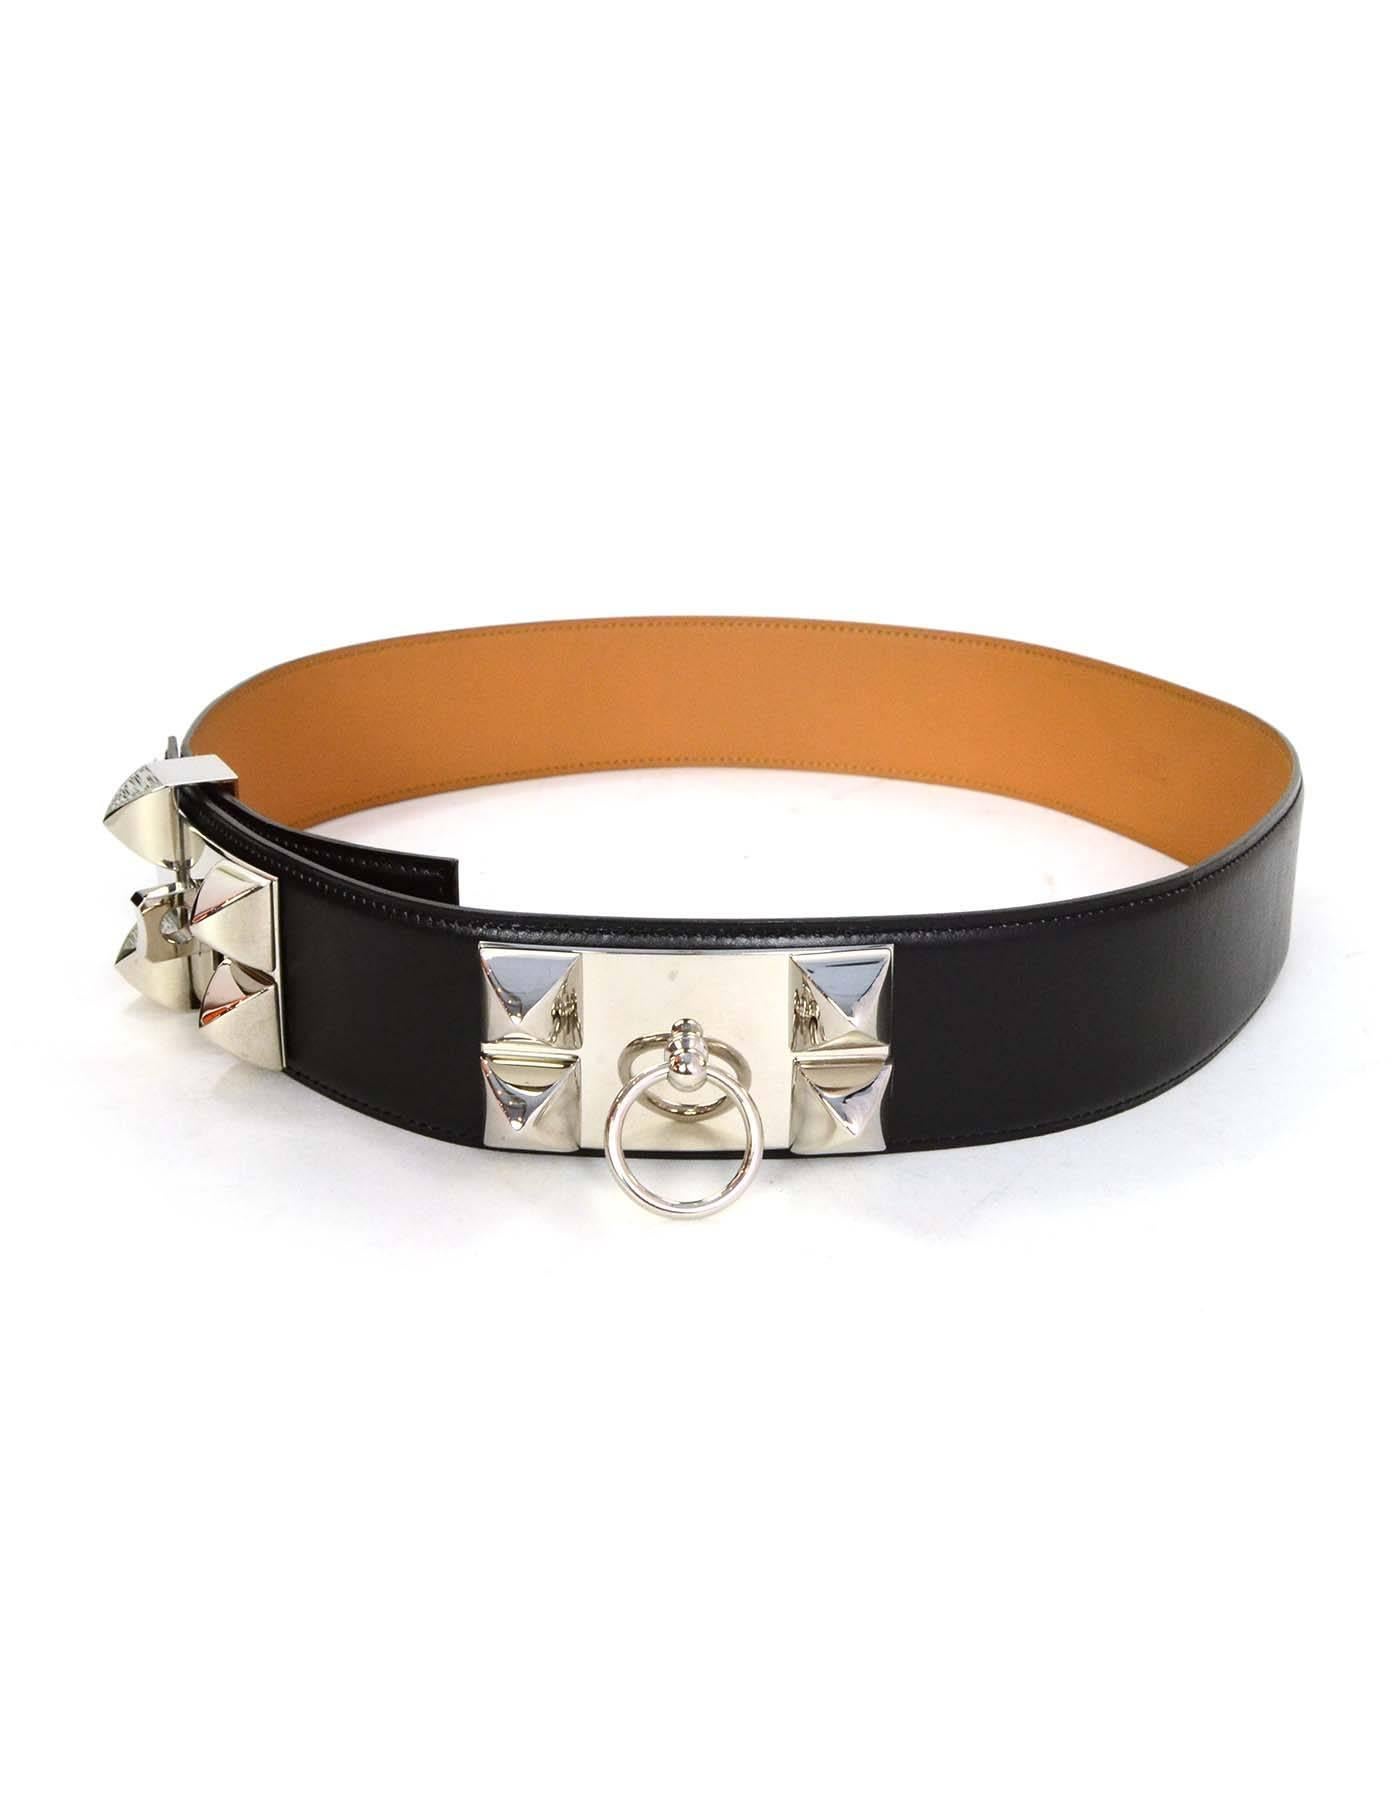 Hermes Black CDC Belt 
Made in: France
Year of Production: 2008
Color: Black and silvertone
Hardware: Palladium
Materials: Leather and metal
Opening/Closure: Adjustable slide lock with notches
Stamp: K stamp in square
Retail Price: $2,350 +